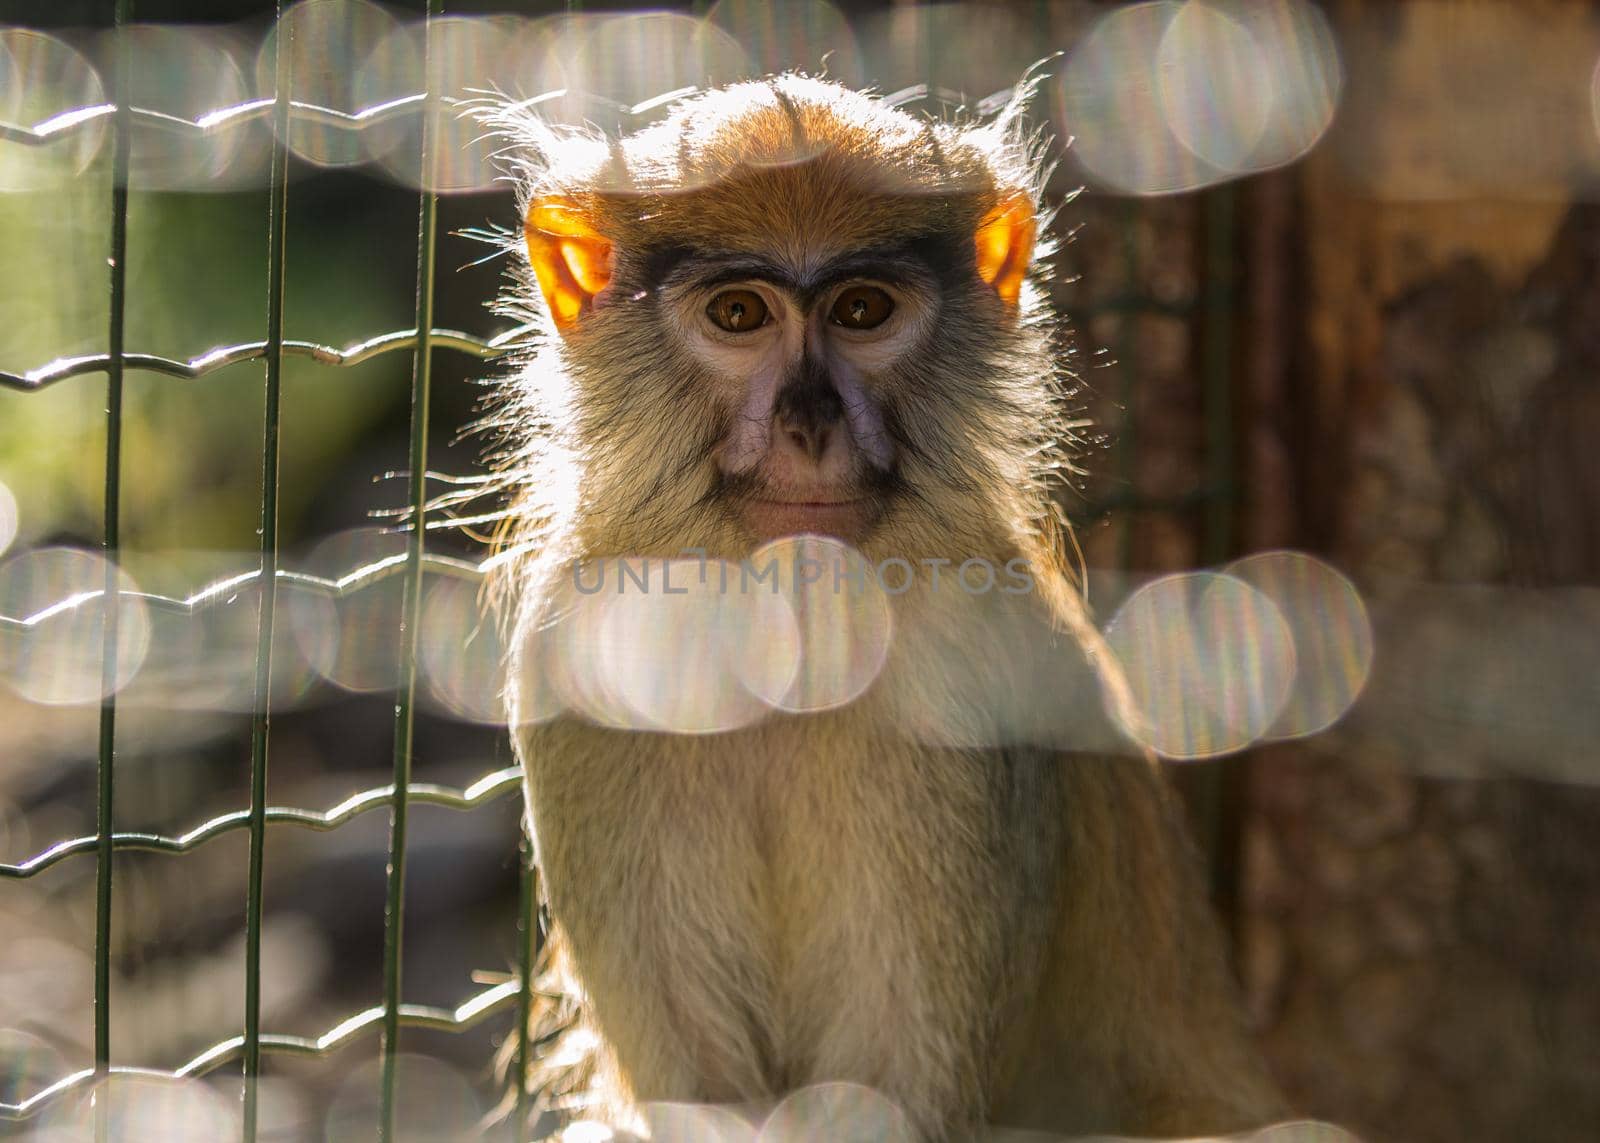 Zoo cute monkey sitting in cage by scudrinja